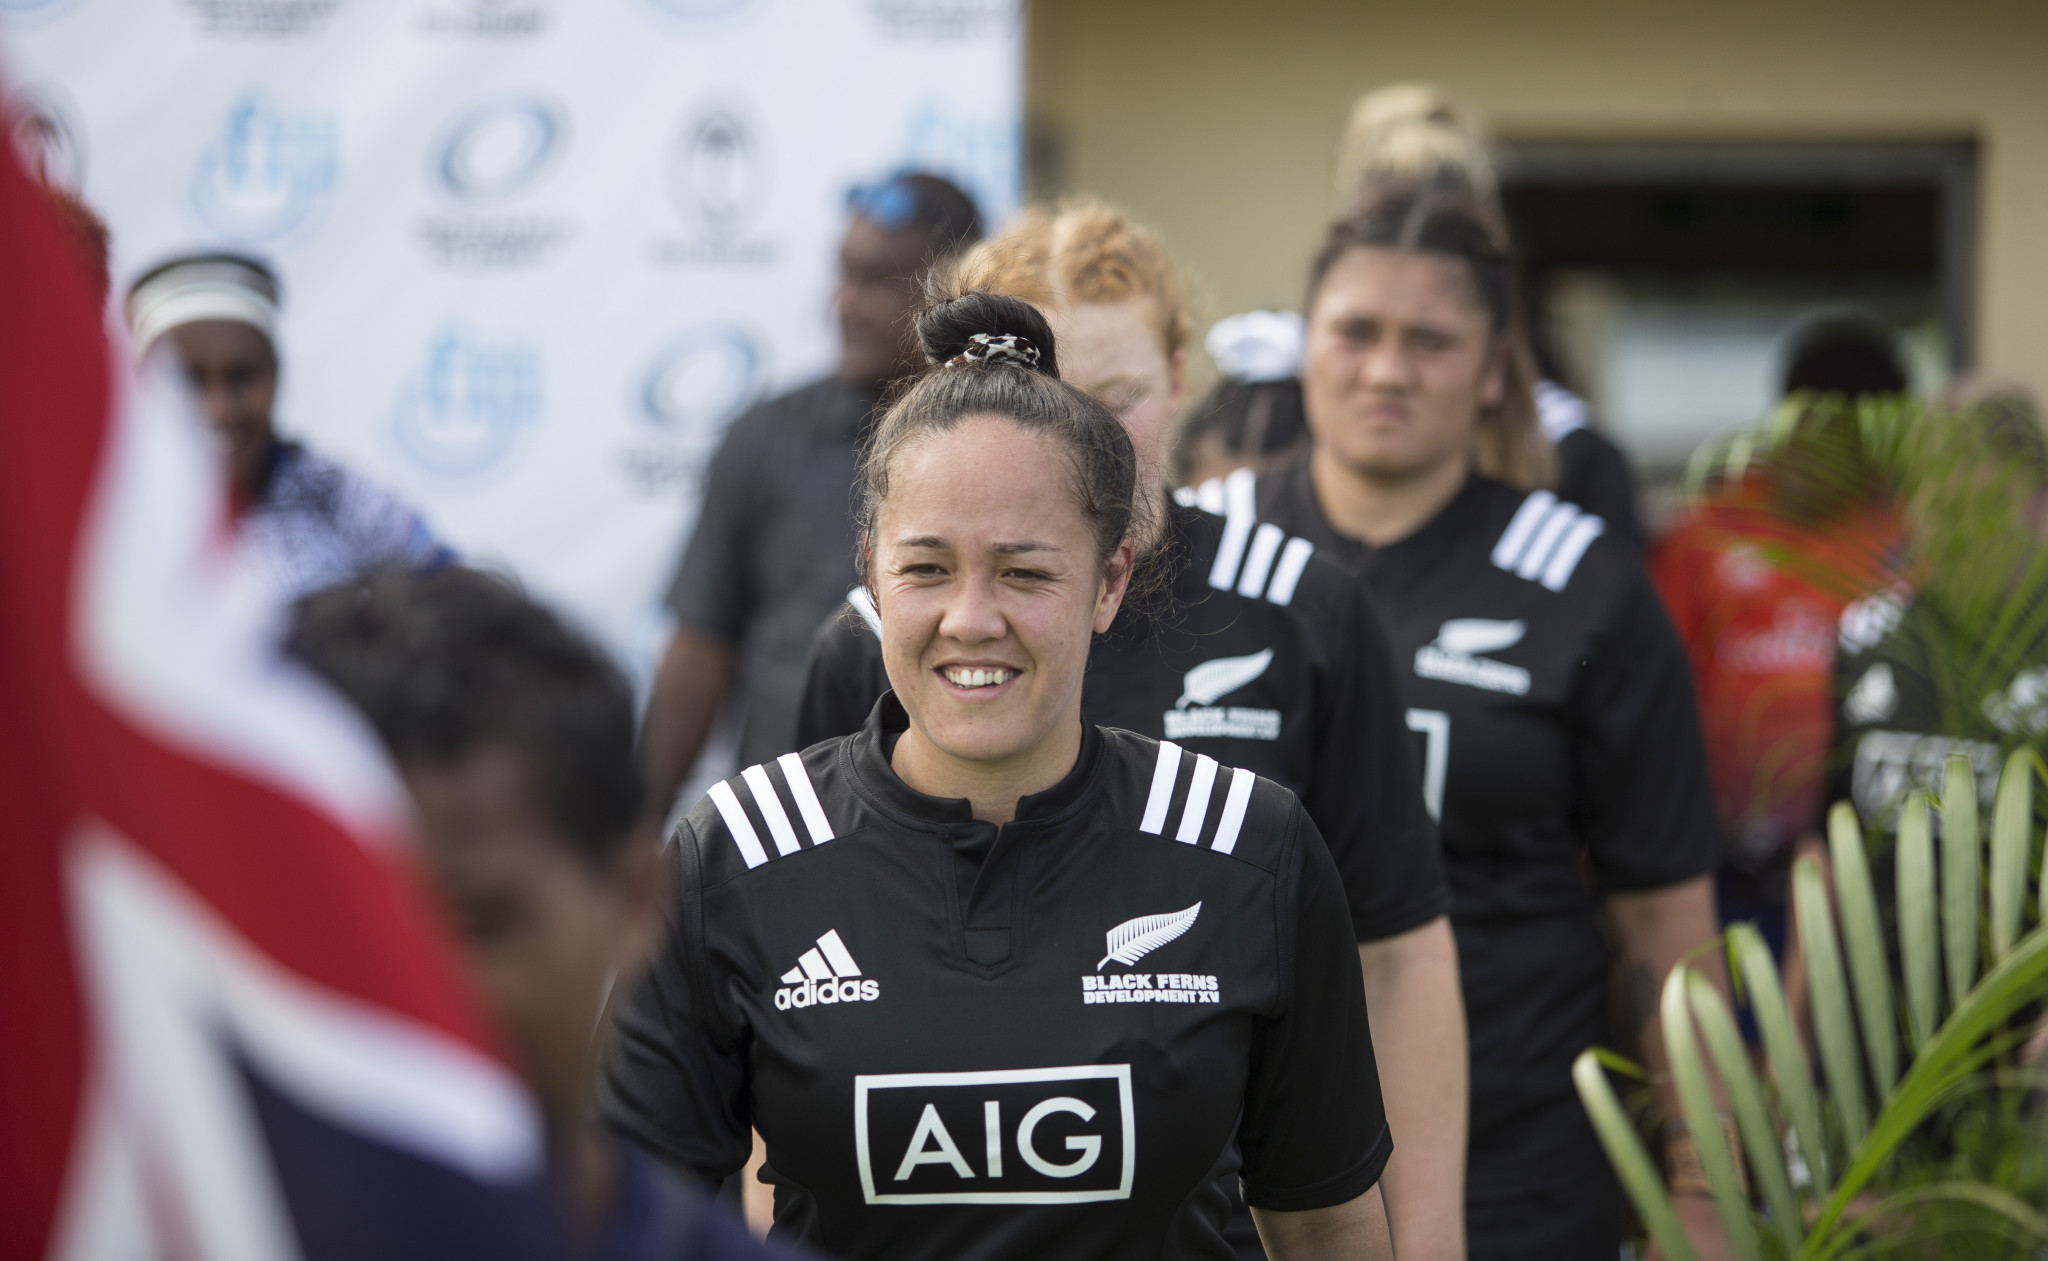 New Zealand earmarks $950,000 for 2022 IWG World Conference on Women and Sport